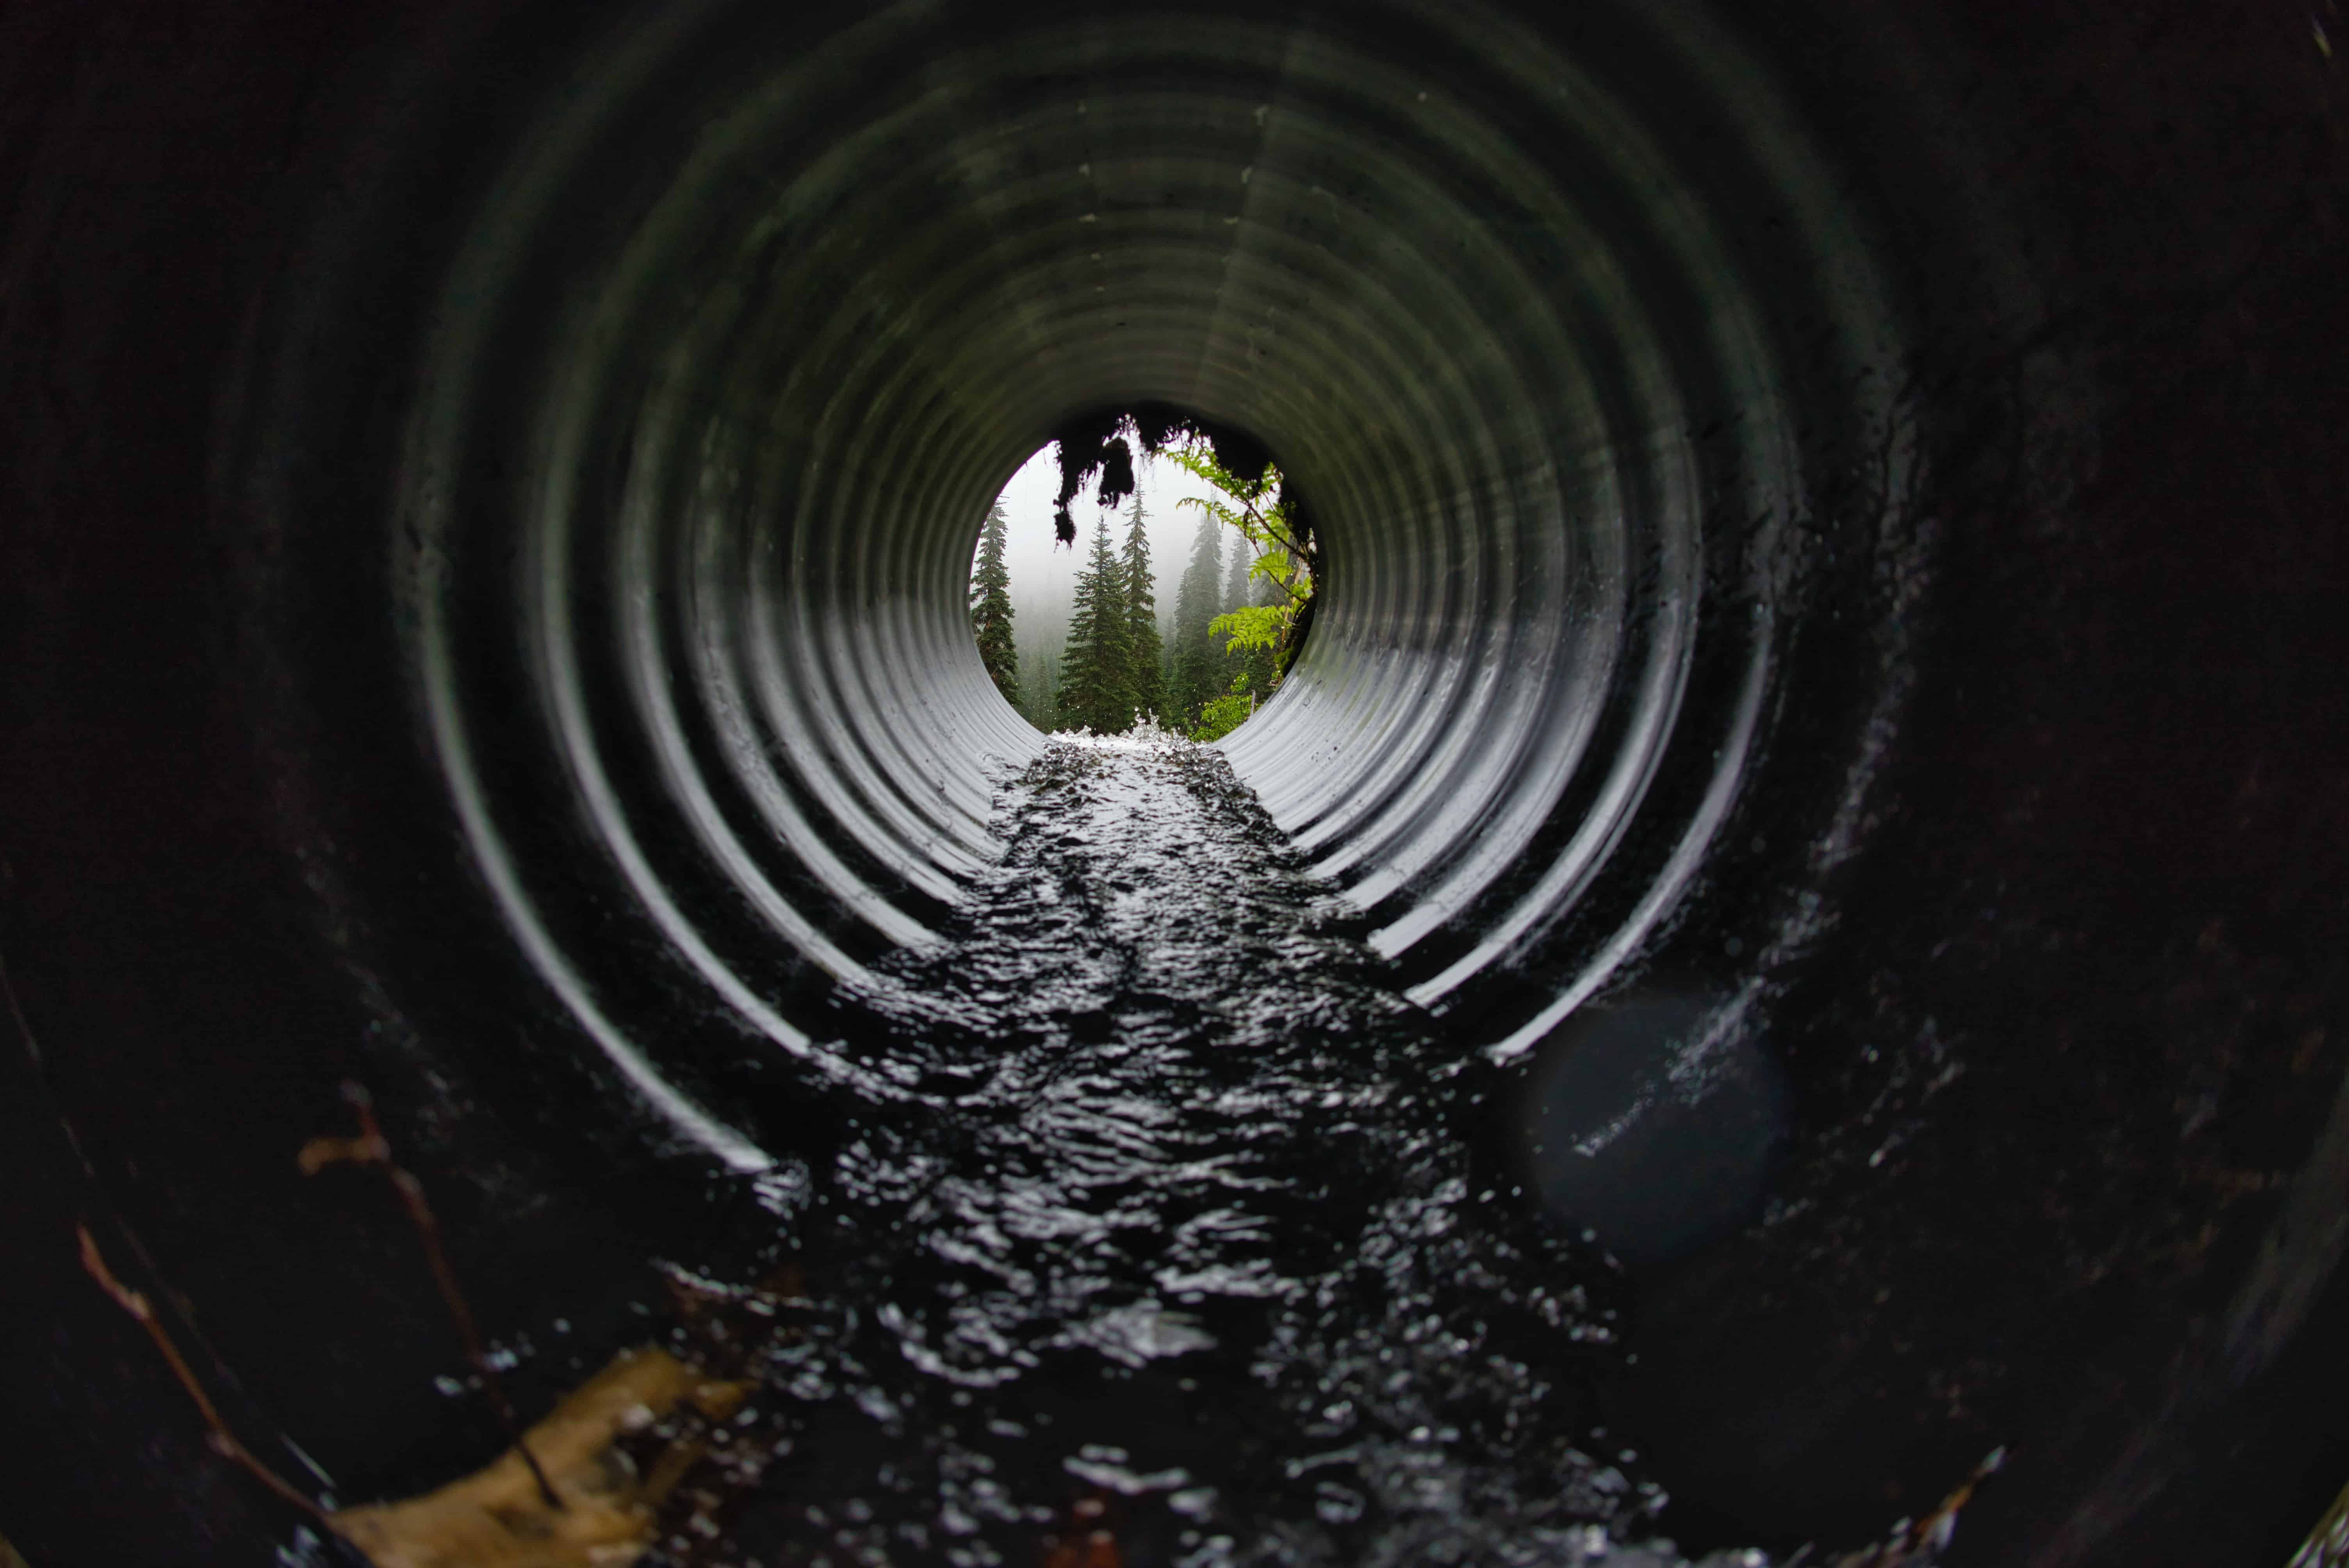 inside of a sewer pipe near Albertson, NY